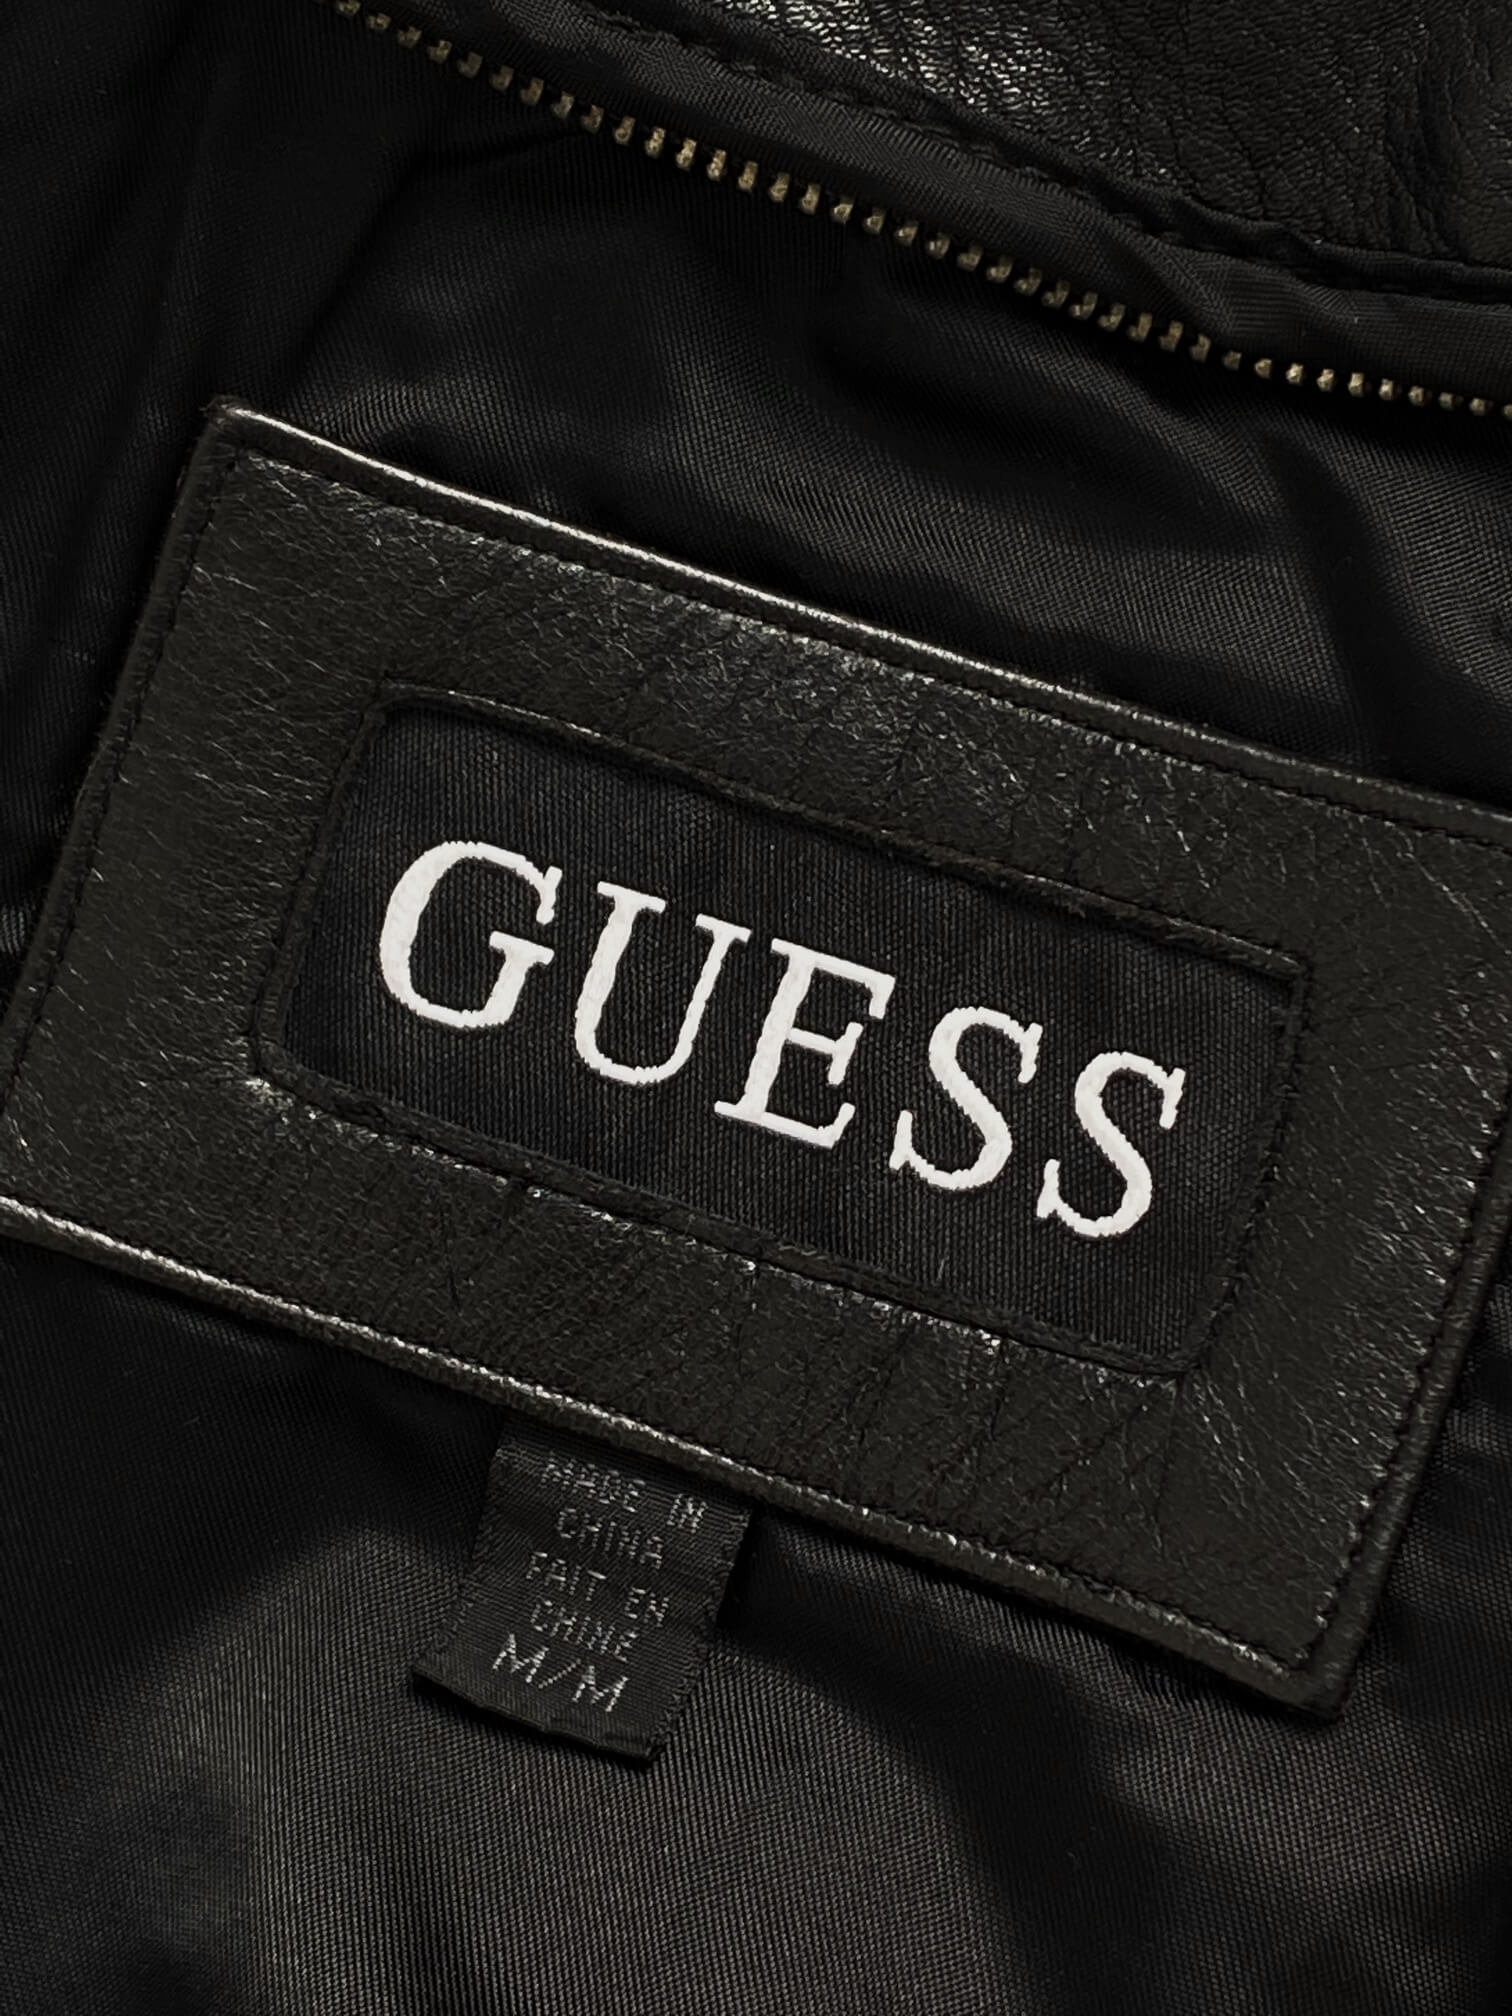 Vintage GUESS Oversized Leather Jacket | XS-L